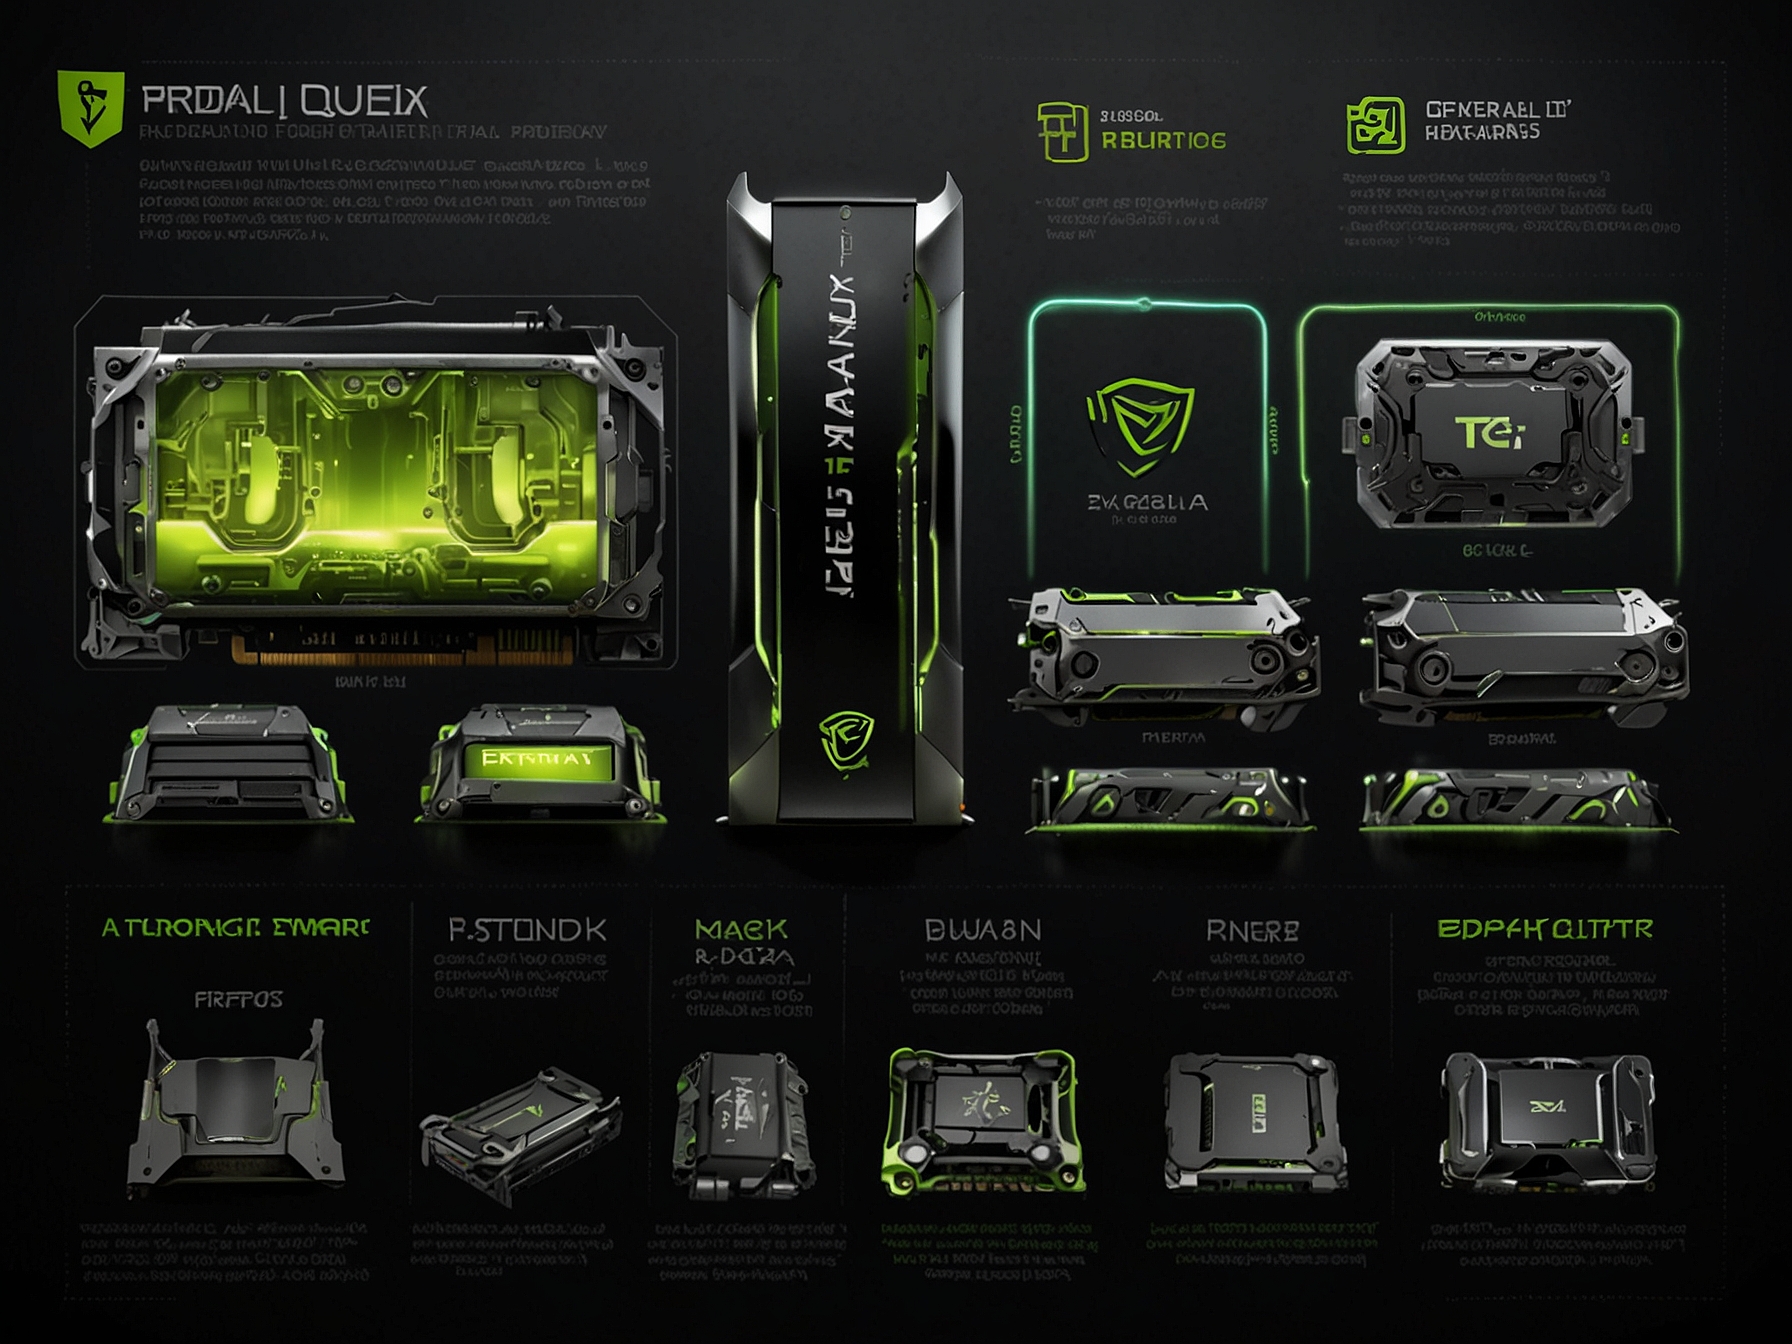 A composite image showcasing Nvidia's GPU technology evolution from gaming-focused GeForce cards to AI-optimized Tesla GPUs, highlighting advancements in computing power and AI applications.